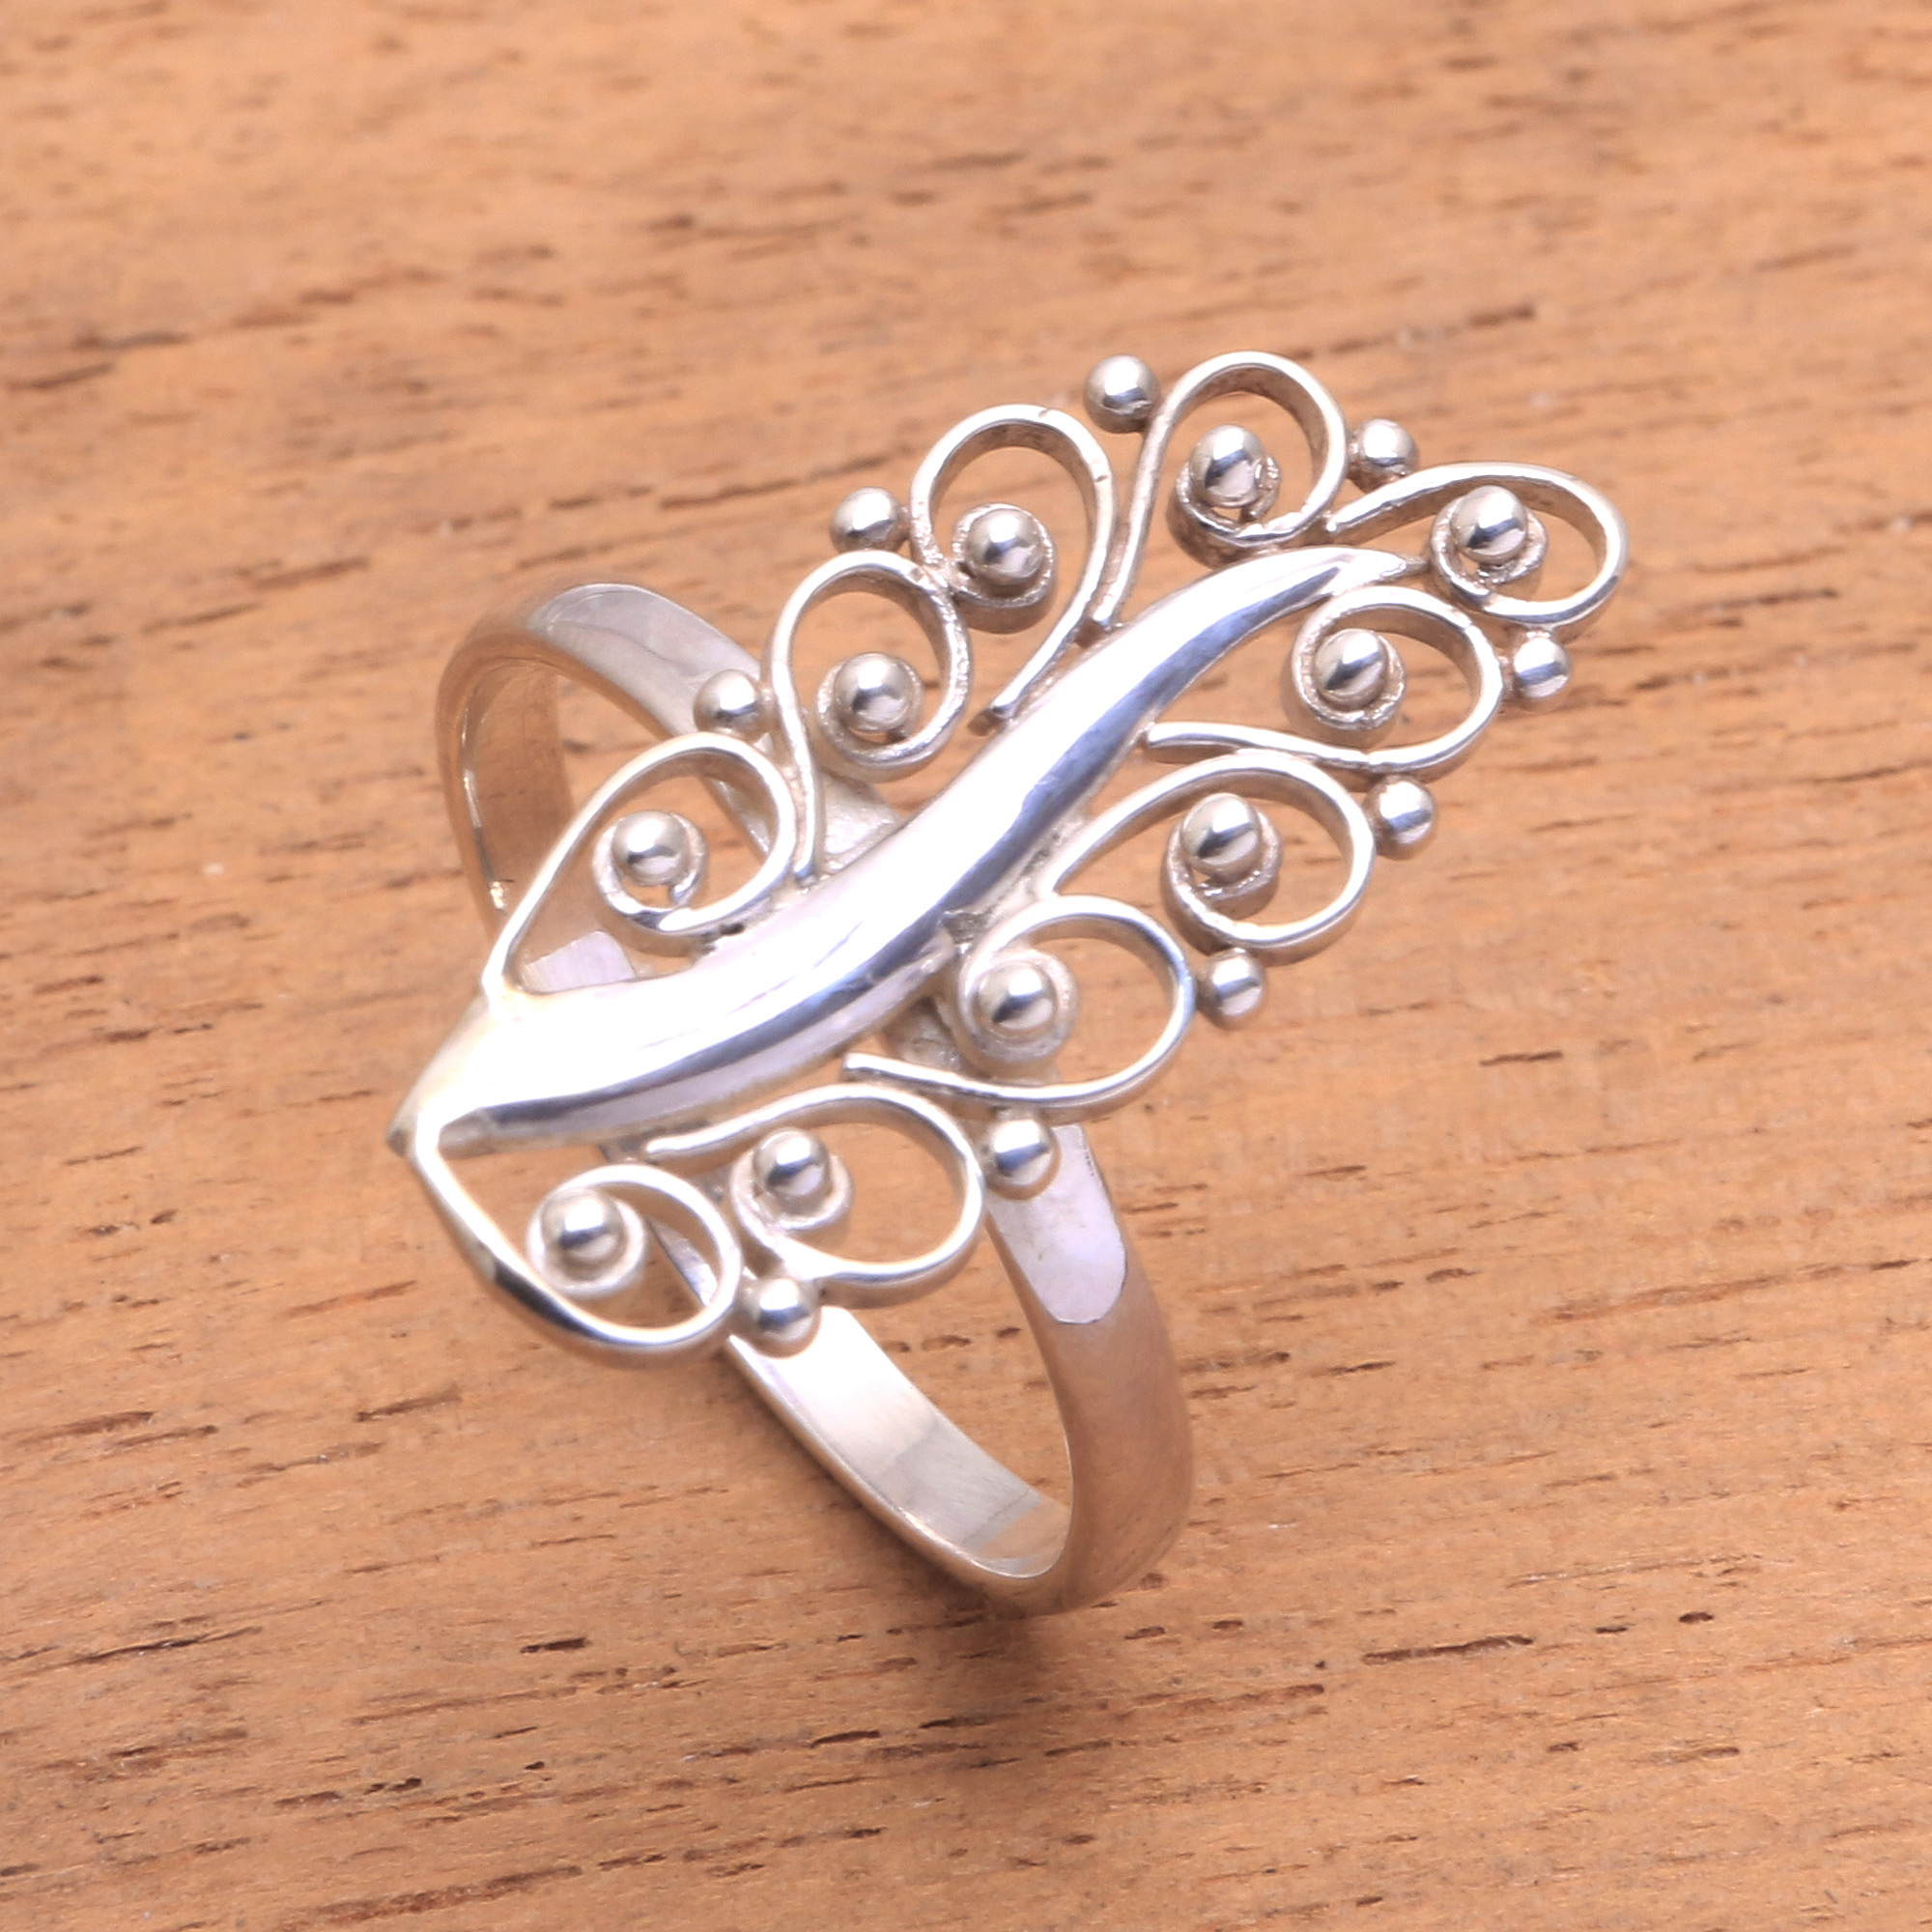 Handcrafted 925 Sterling Silver Leaf Ring Handmade Jewelry